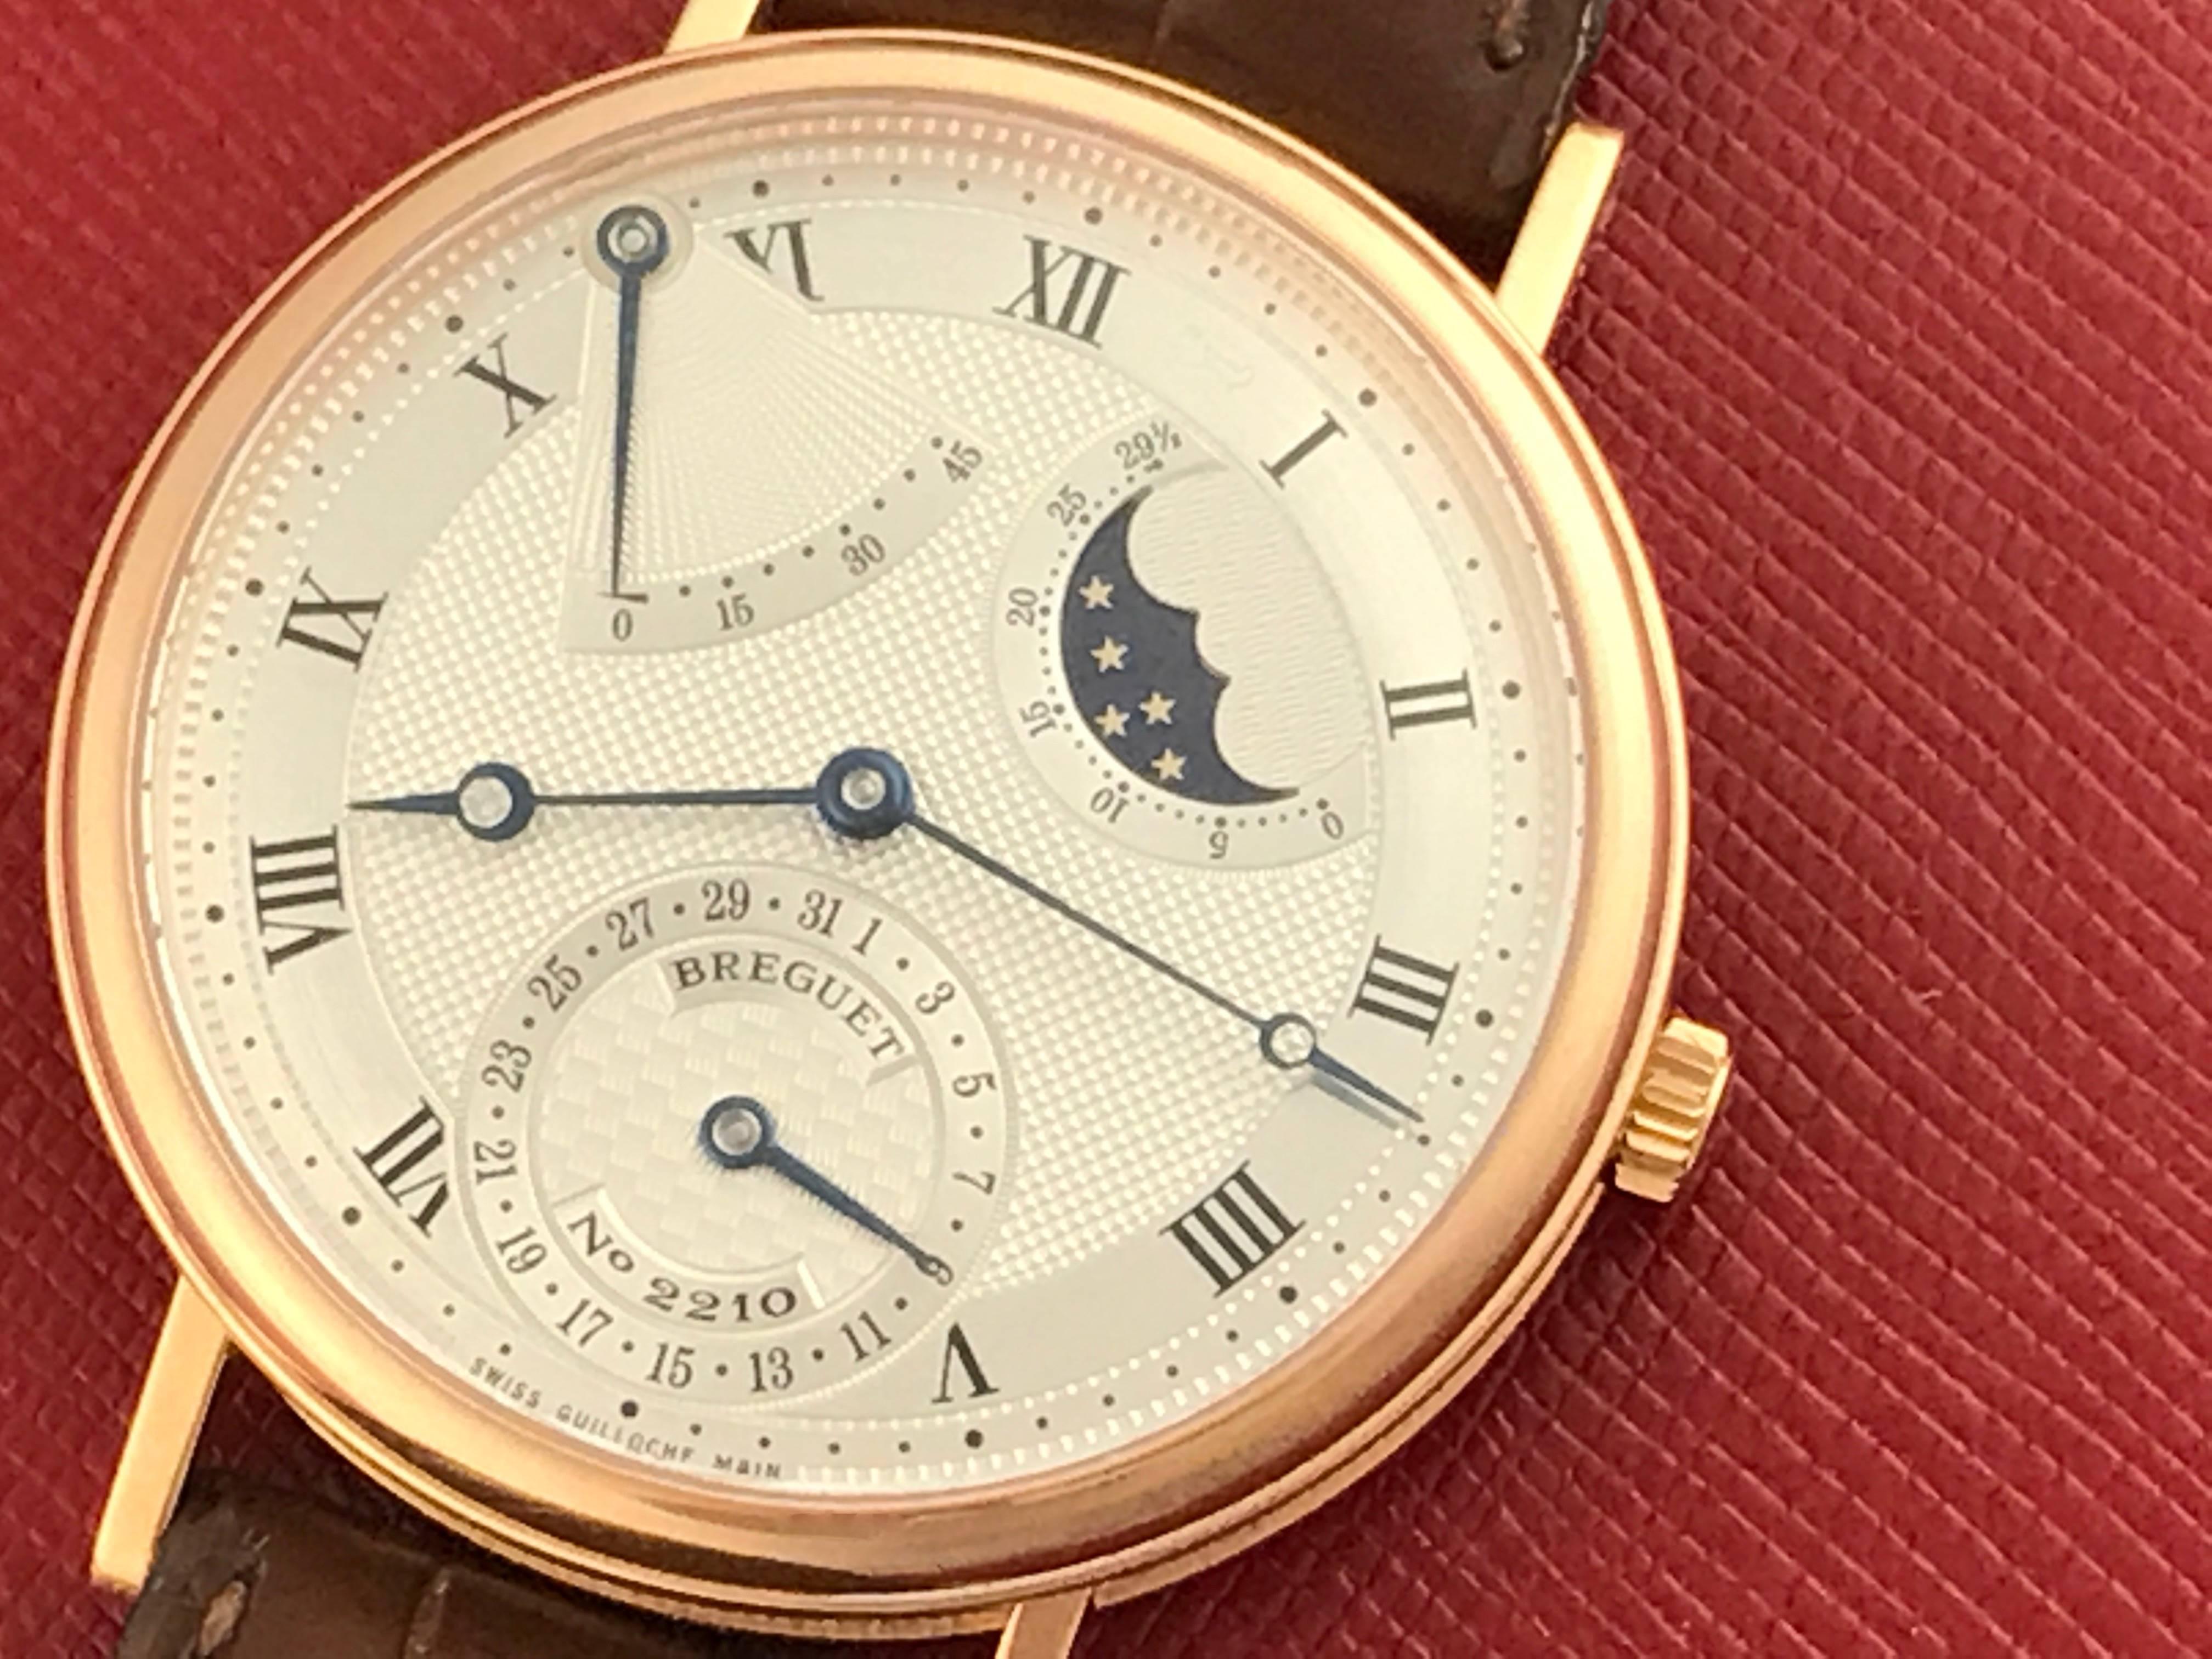 Breguet Classique Moon Phase Model 3137BR/11/986 pre-owned men's automatic wrist watch. Moonphase with Power Reserve Indicator and sweeping center seconds. Silvered Guilloche Dial with black Roman numerals. 18k Rose Gold round style case with